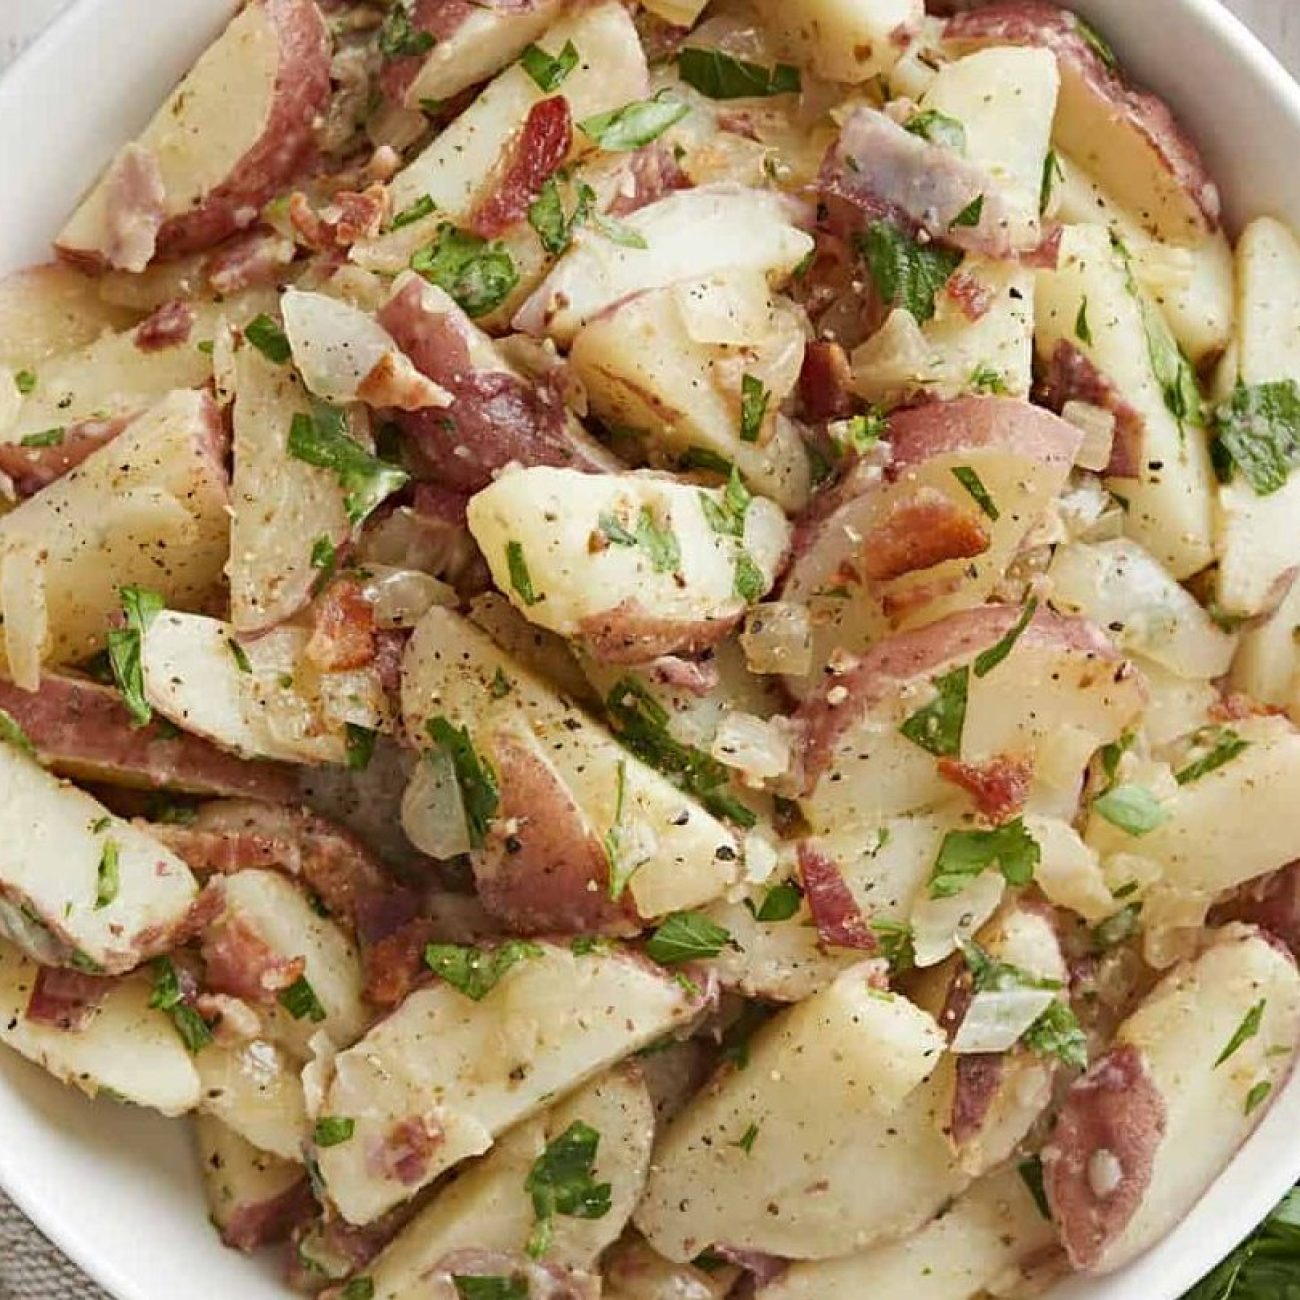 Hot German Potato Salad For The Weight